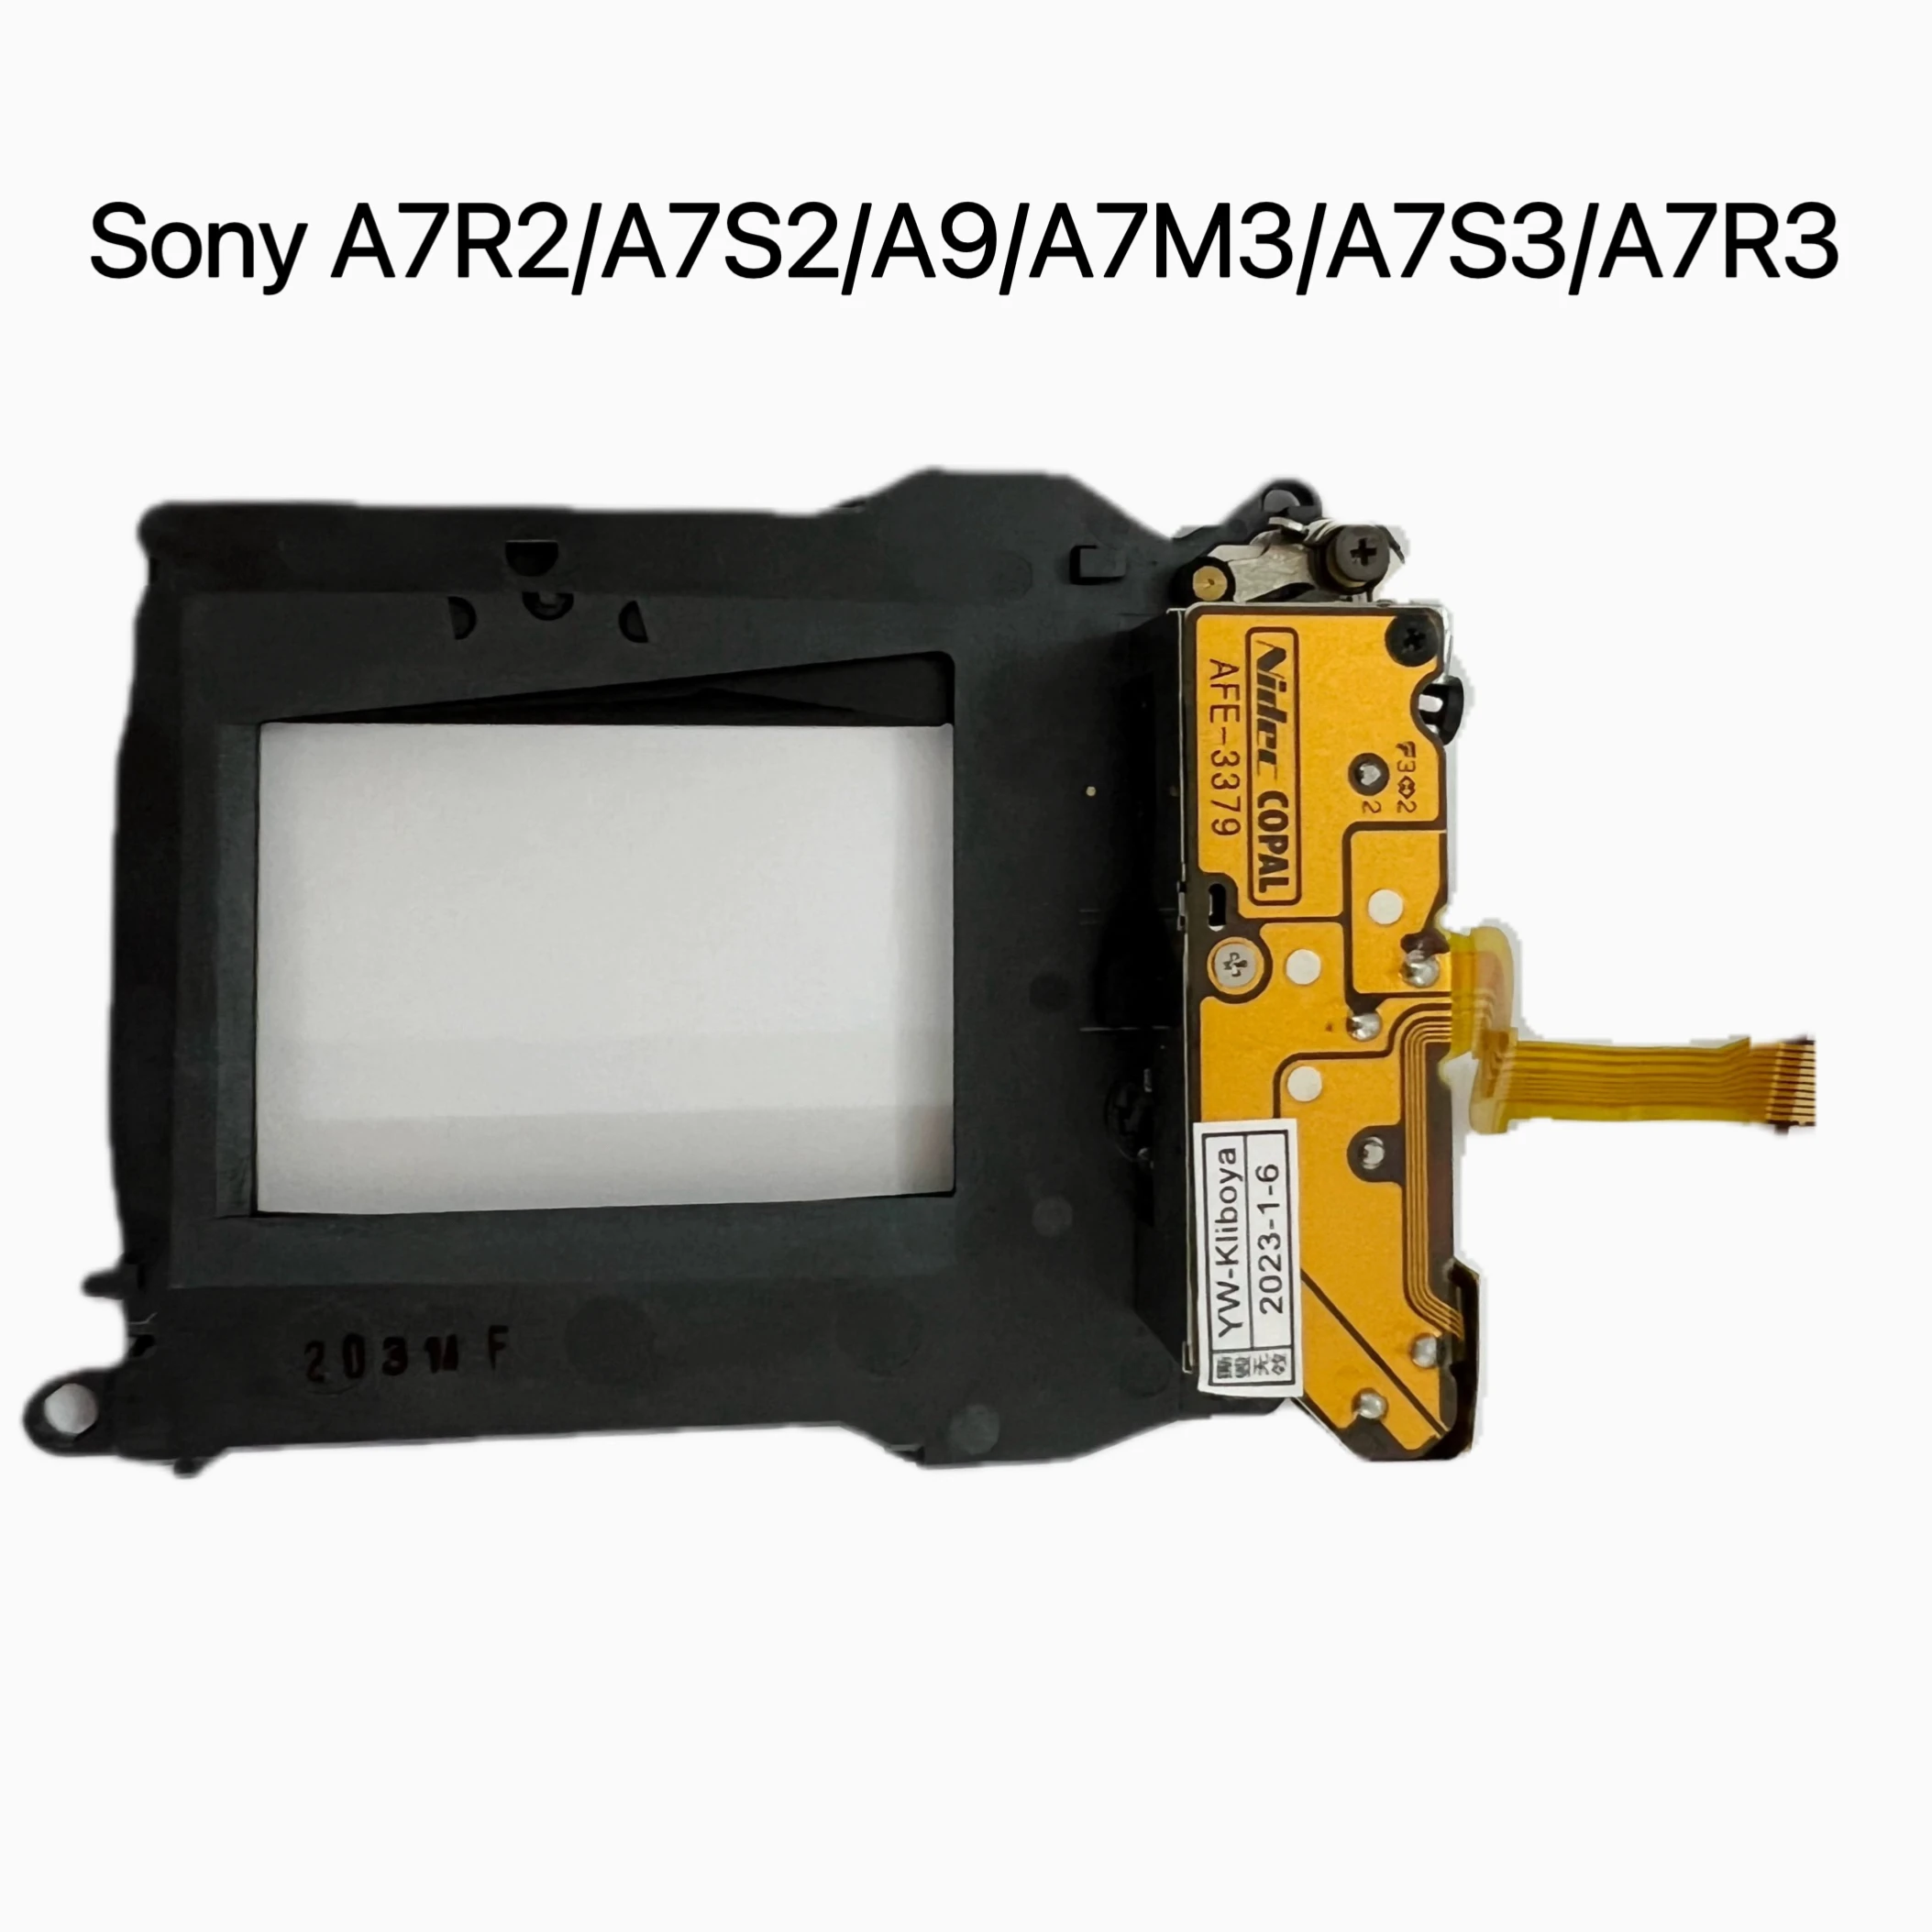 

Suitable for Sony A7R2 A7S2 A9 A7M3 A7S3 A7R3 shutter assembly brand new original stock with blades